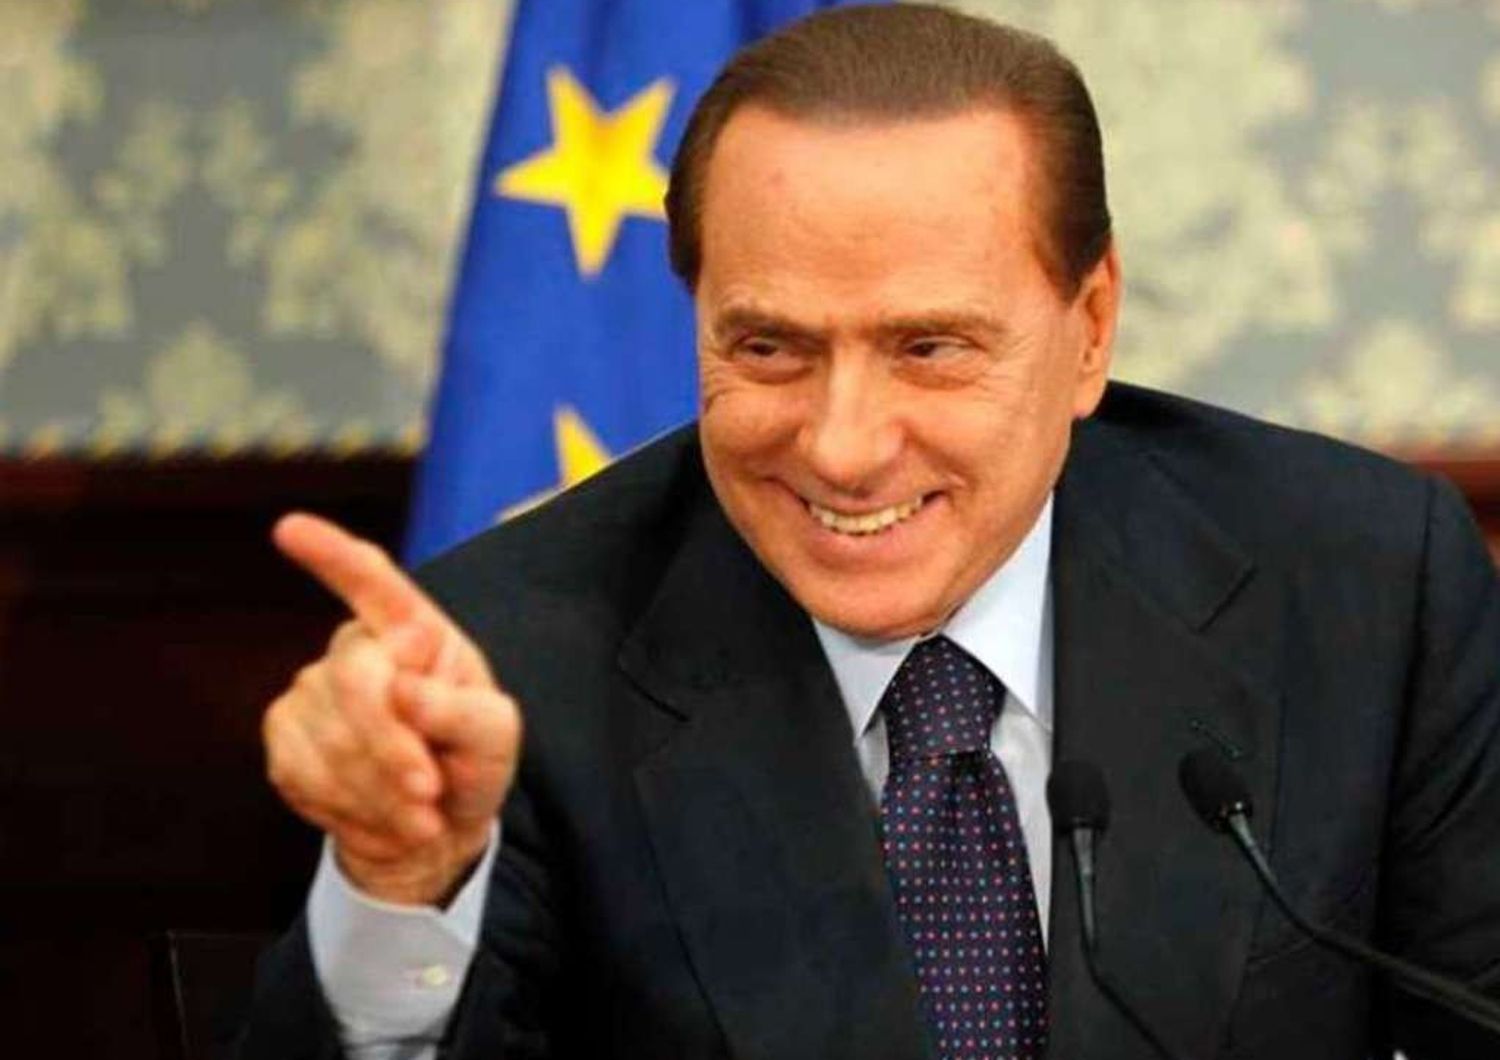 Berlusconi insists on swift approval of electoral reform